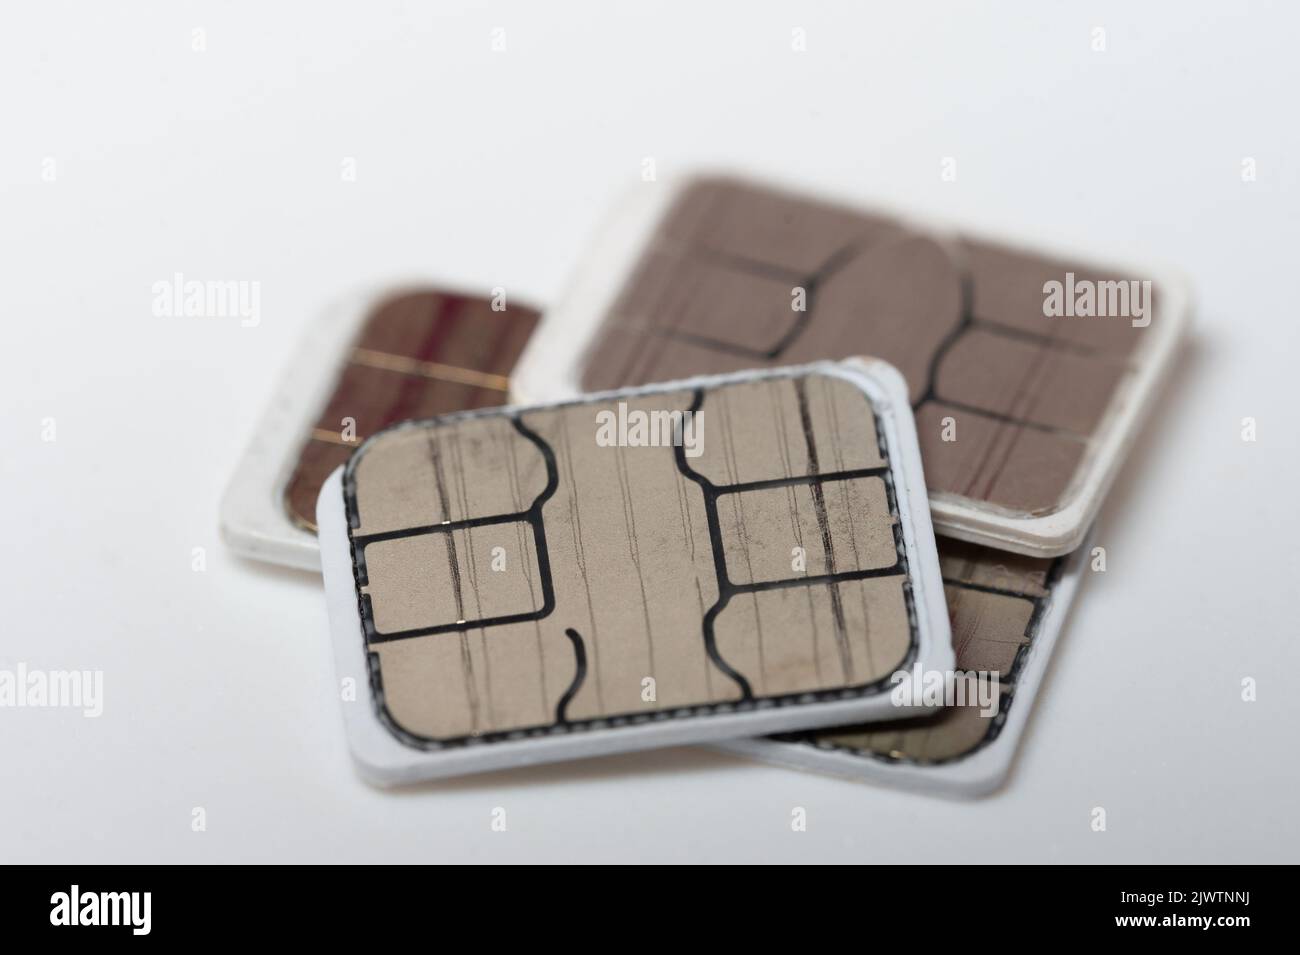 Smartphone sim card pile macro close up view isolated Stock Photo